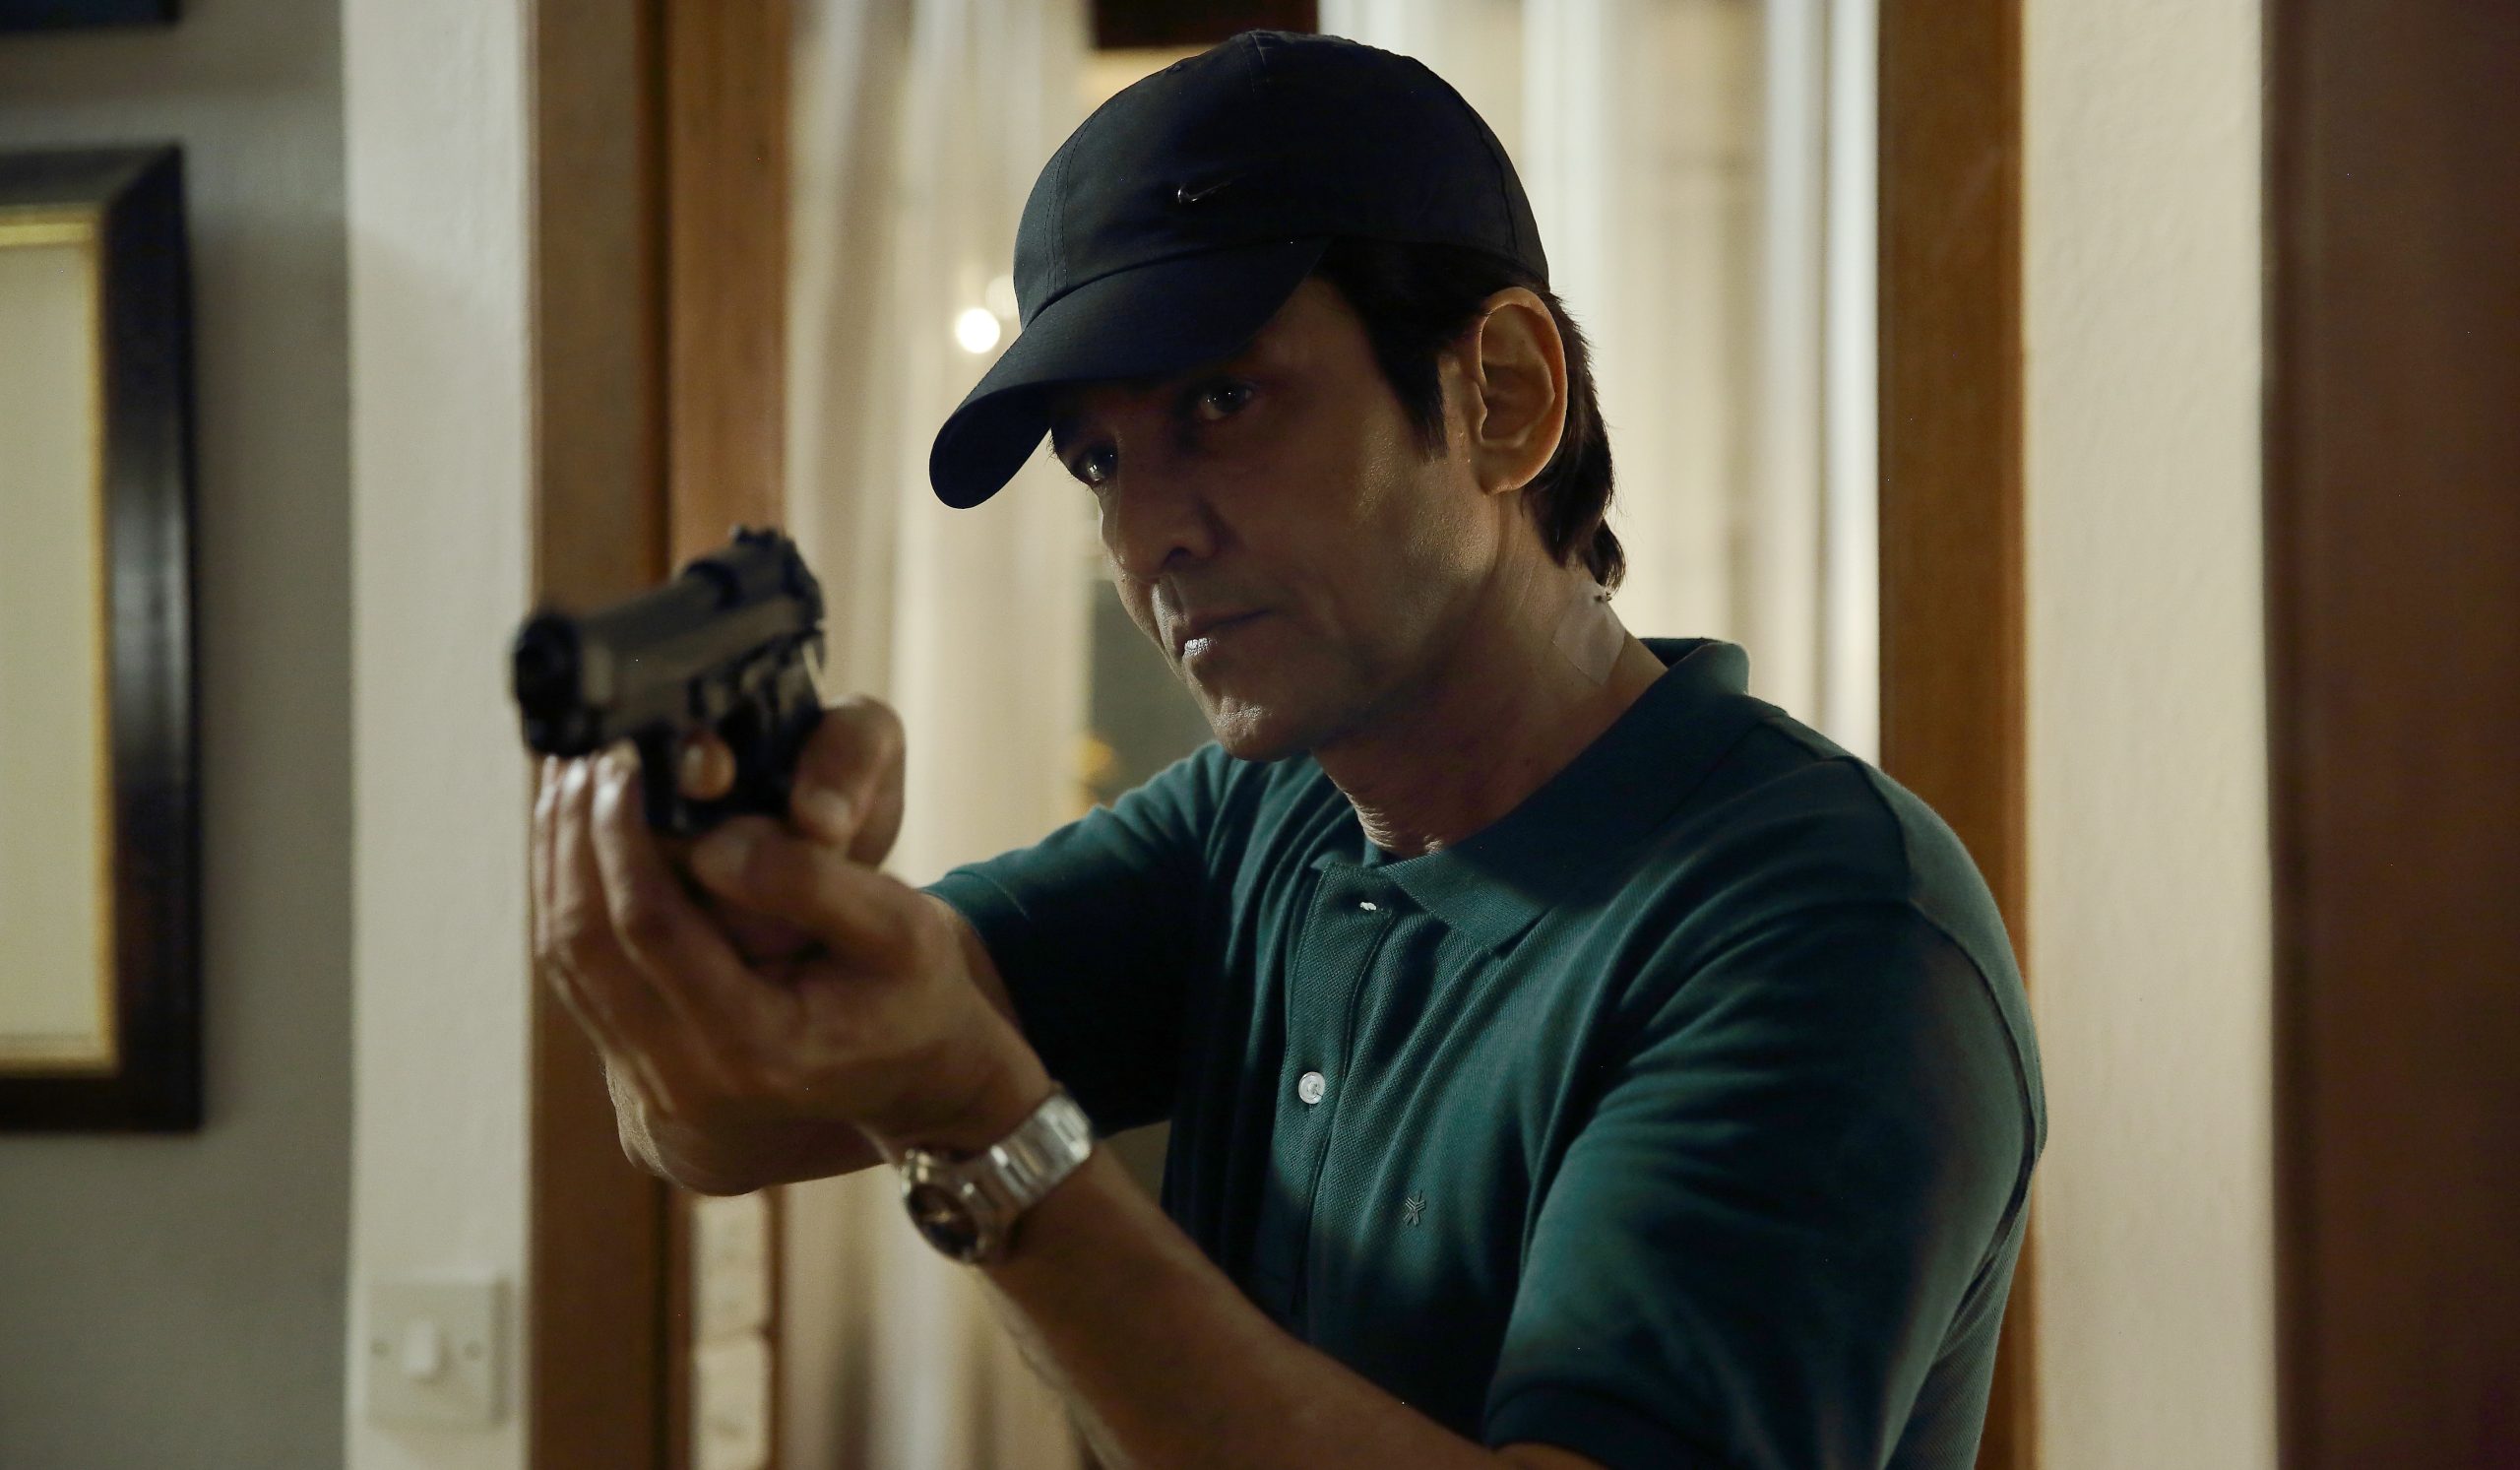 Special Ops 1.5: The Himmat Story’ actor #KayKayMenon says, ‘The best part of being an actor is we can play different people without carrying the baggage of the person’!